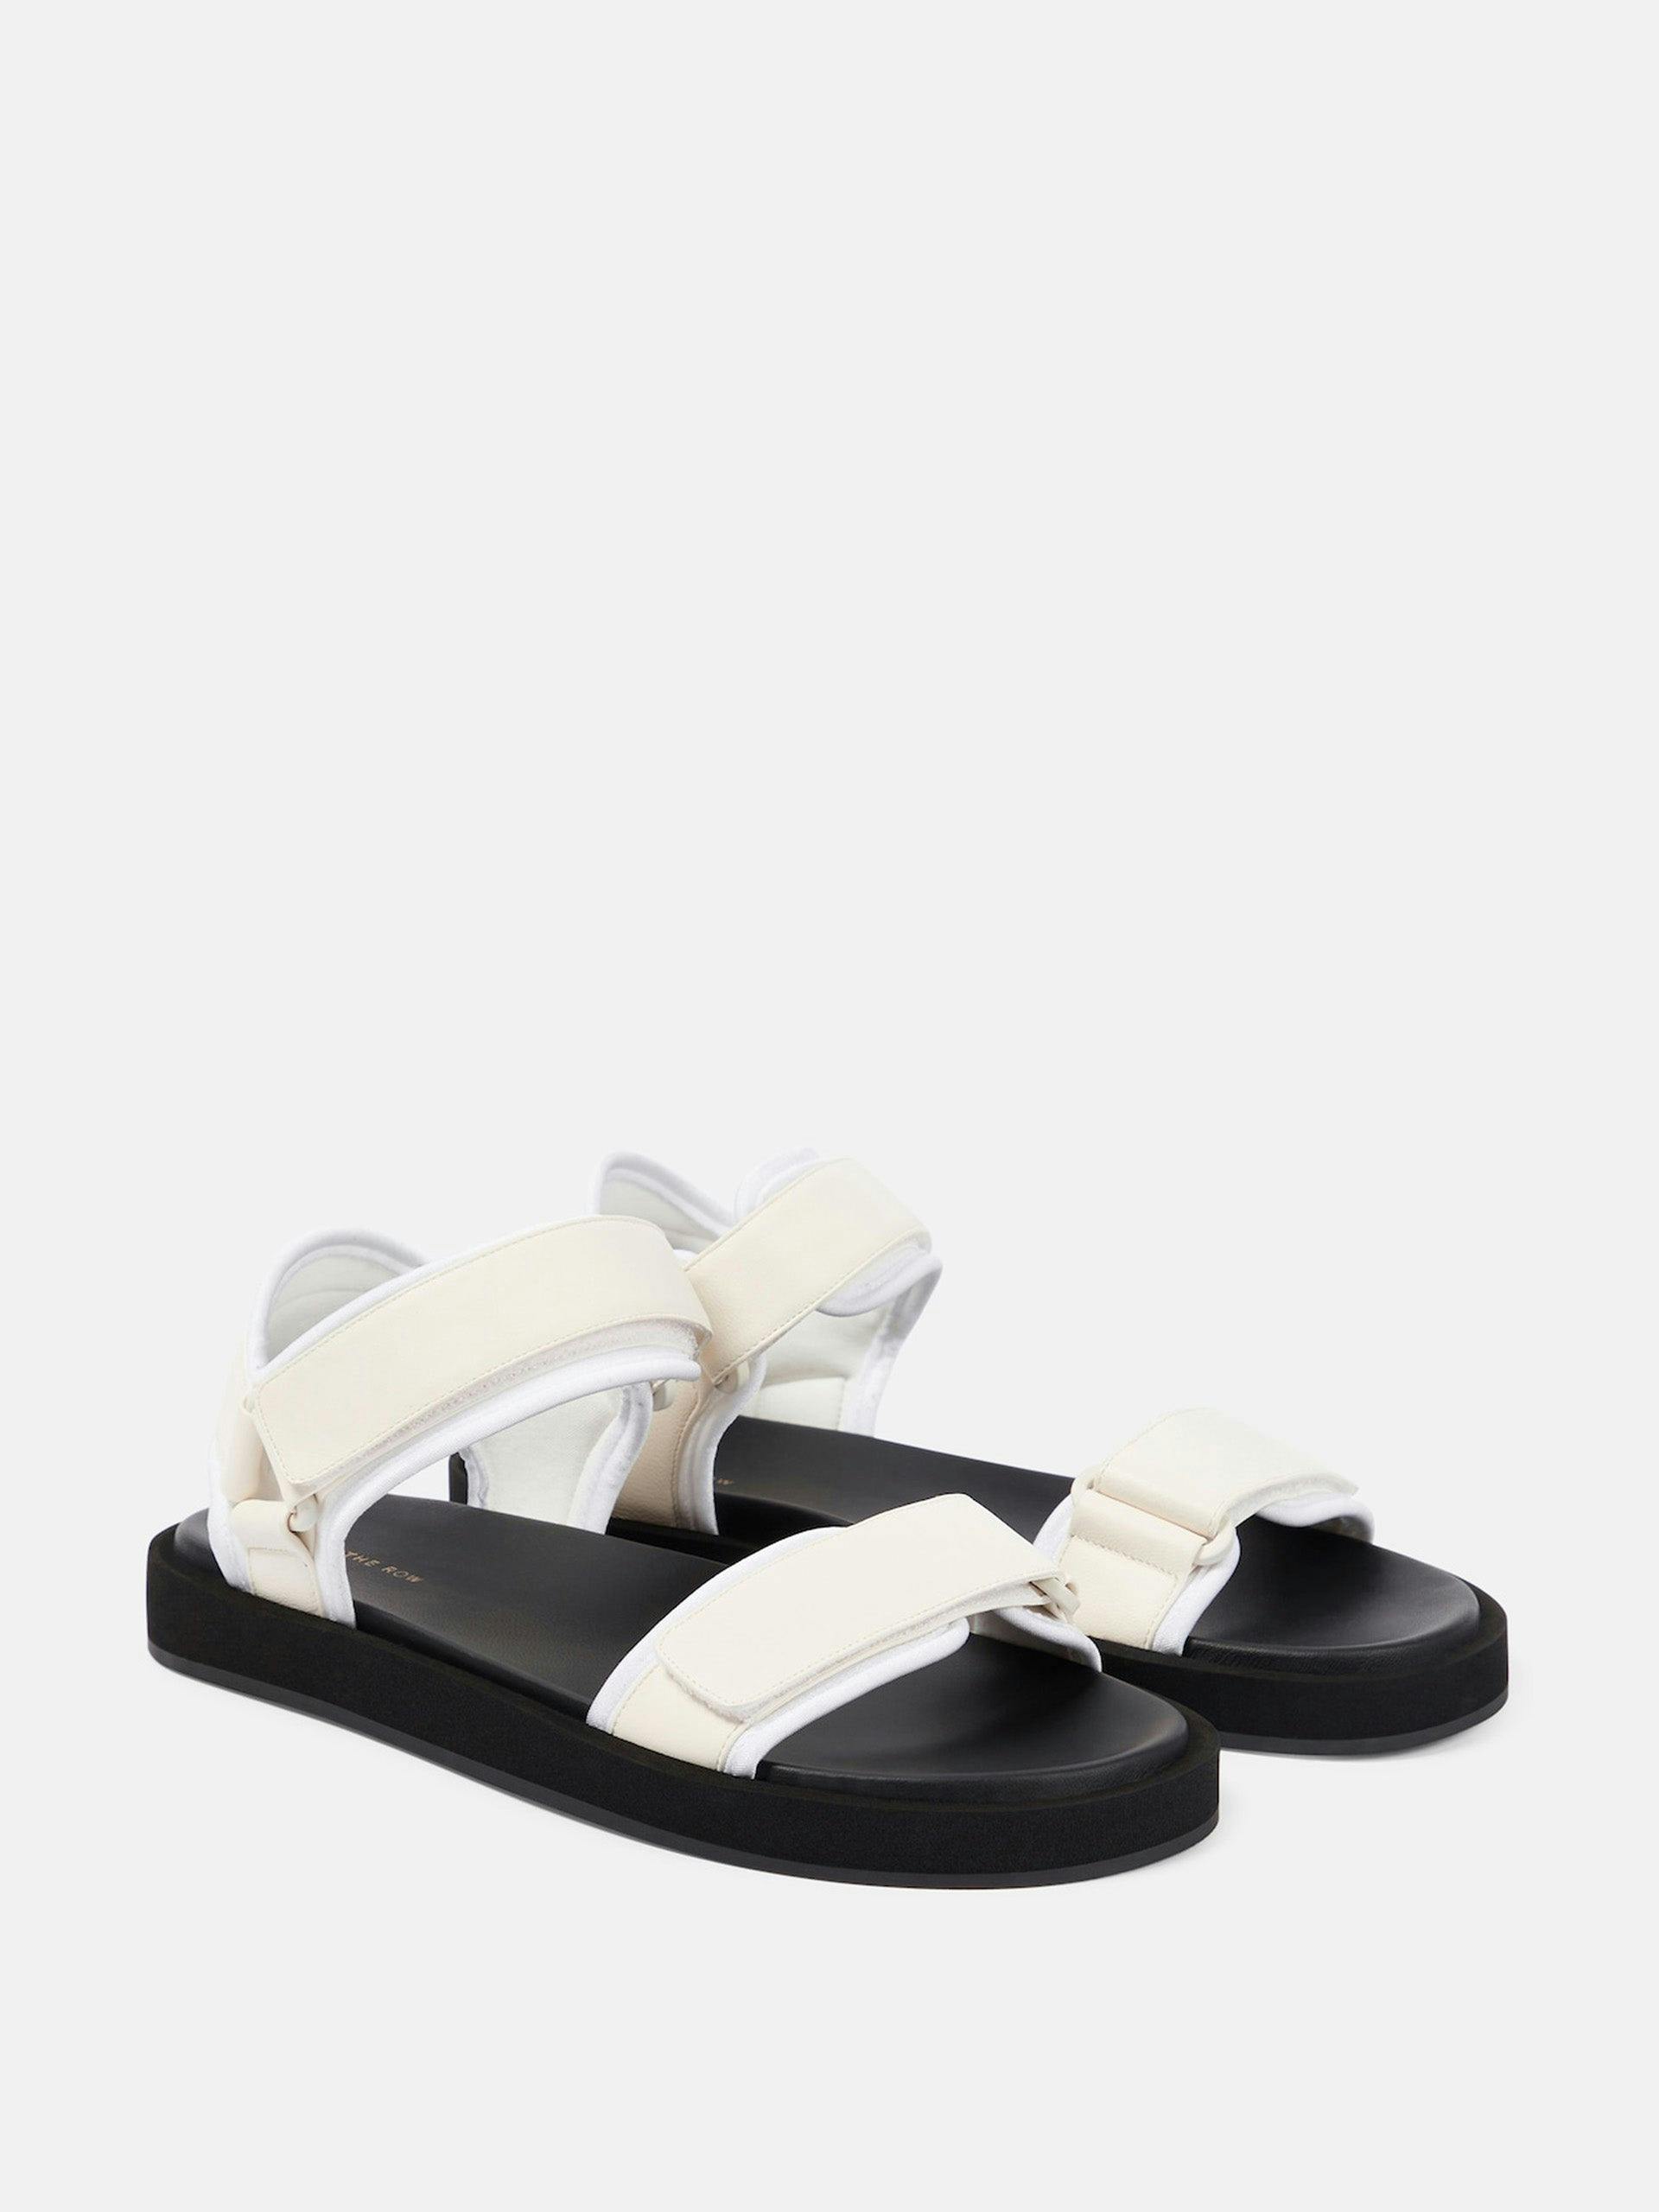 Hook and Loop leather sandals